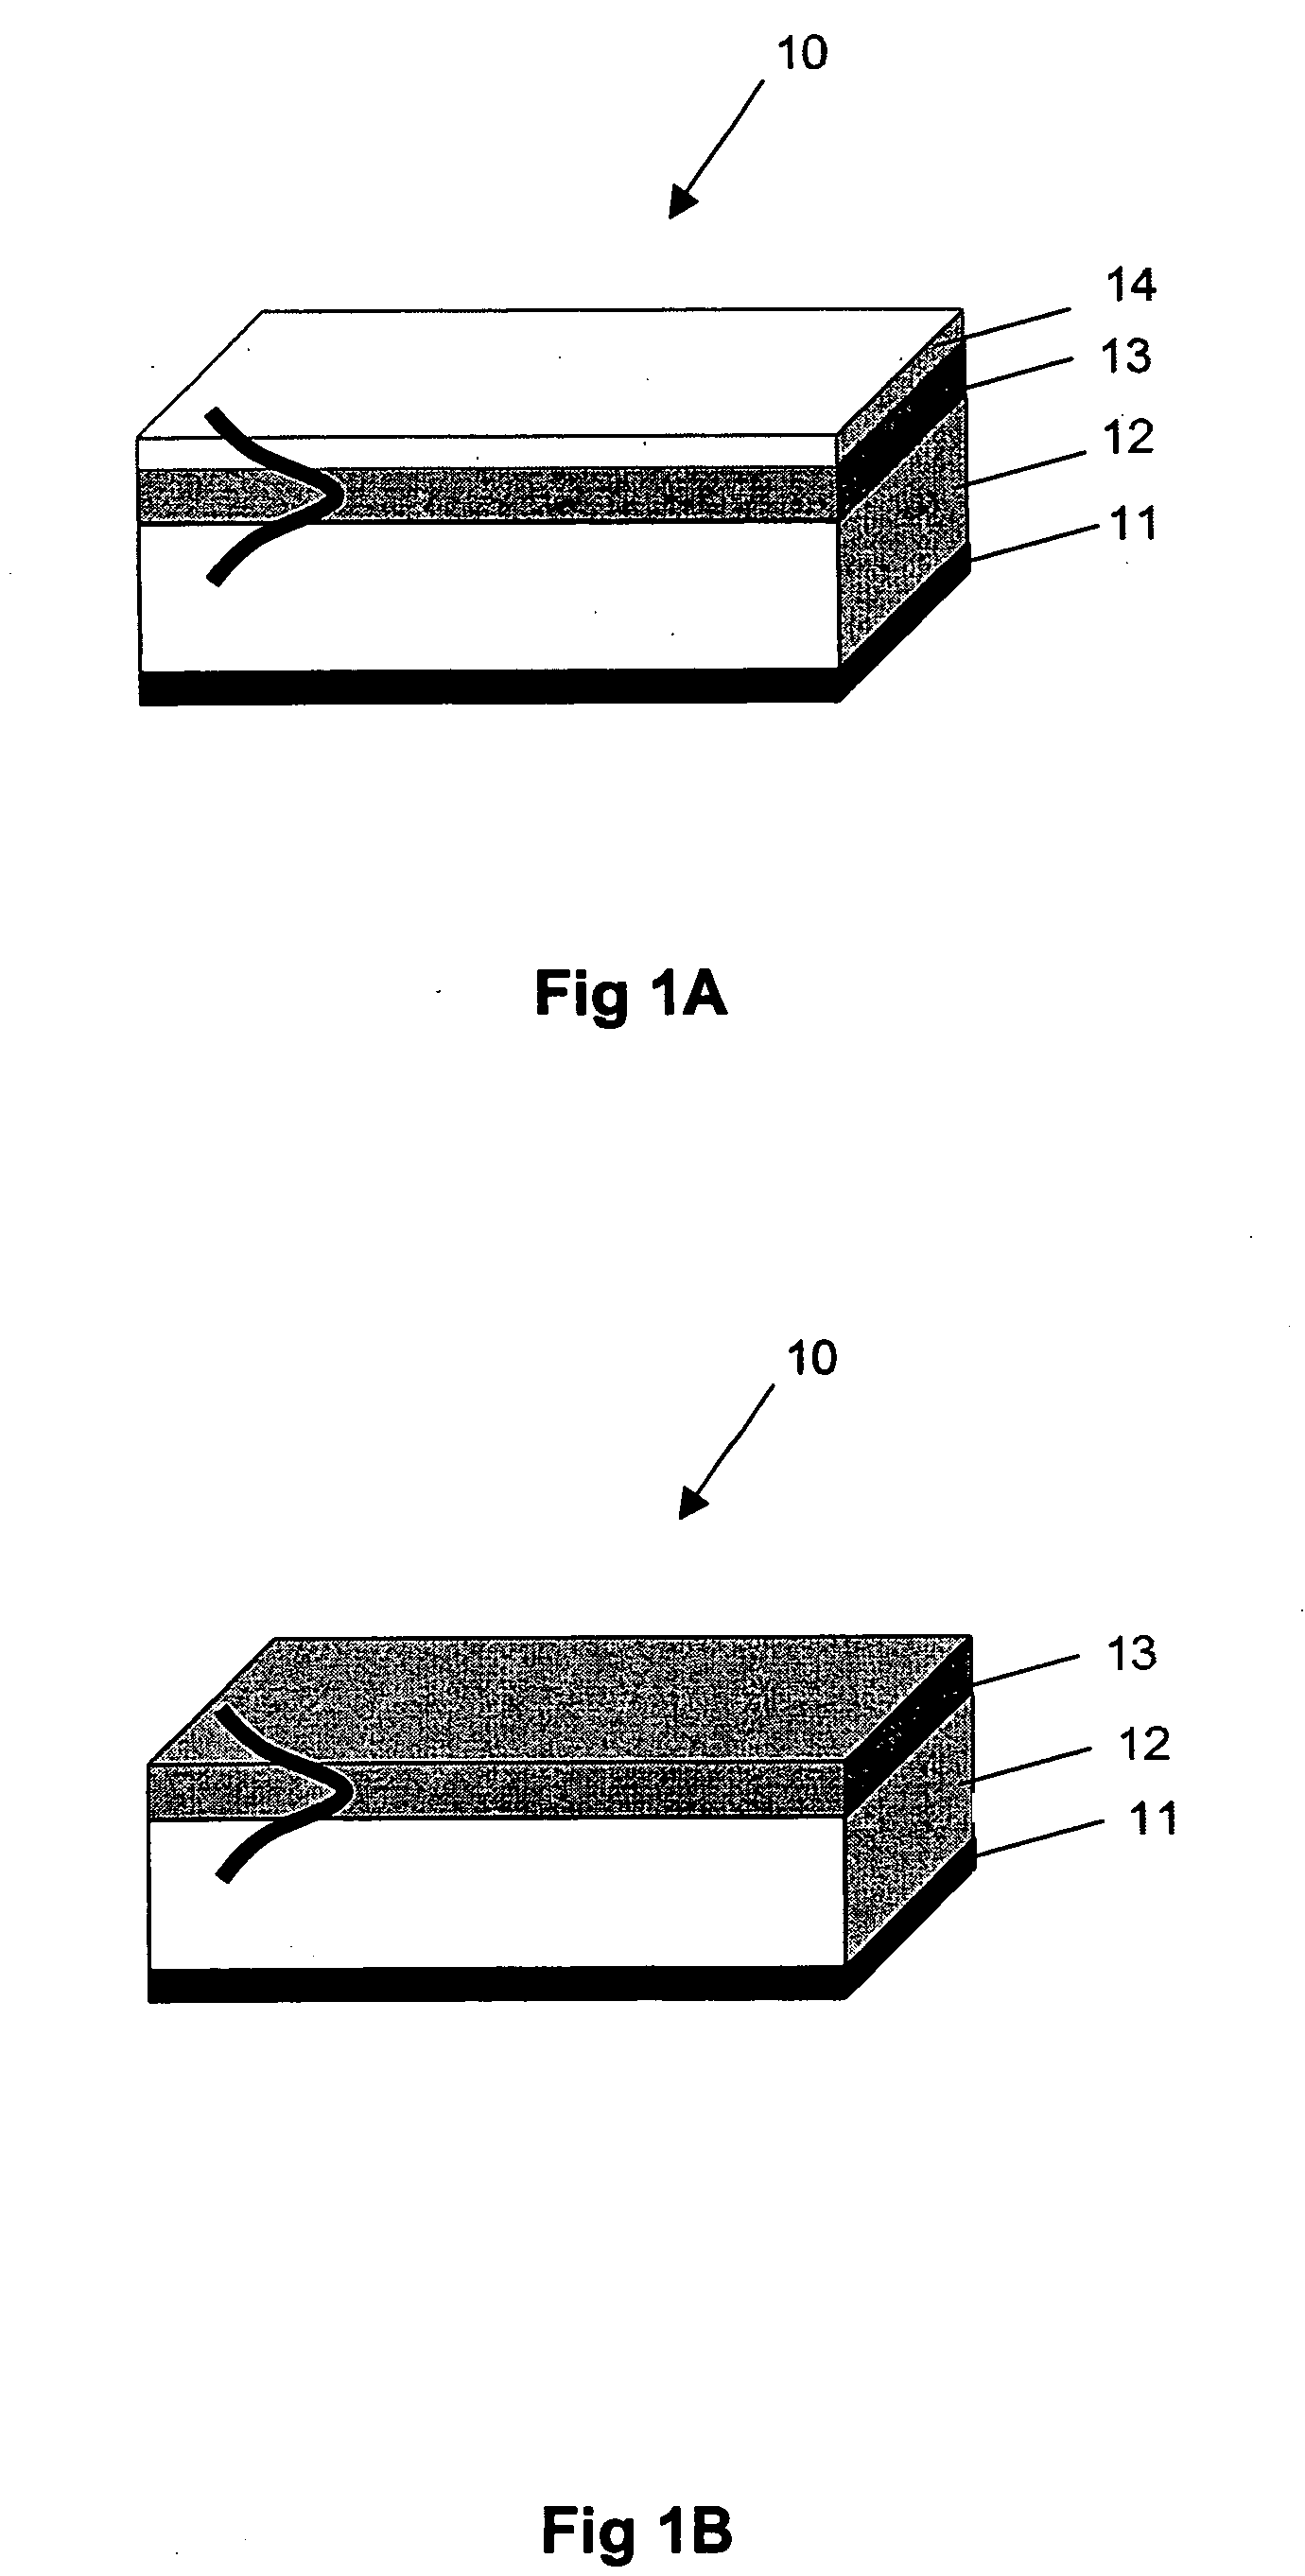 Nonlinear optical device